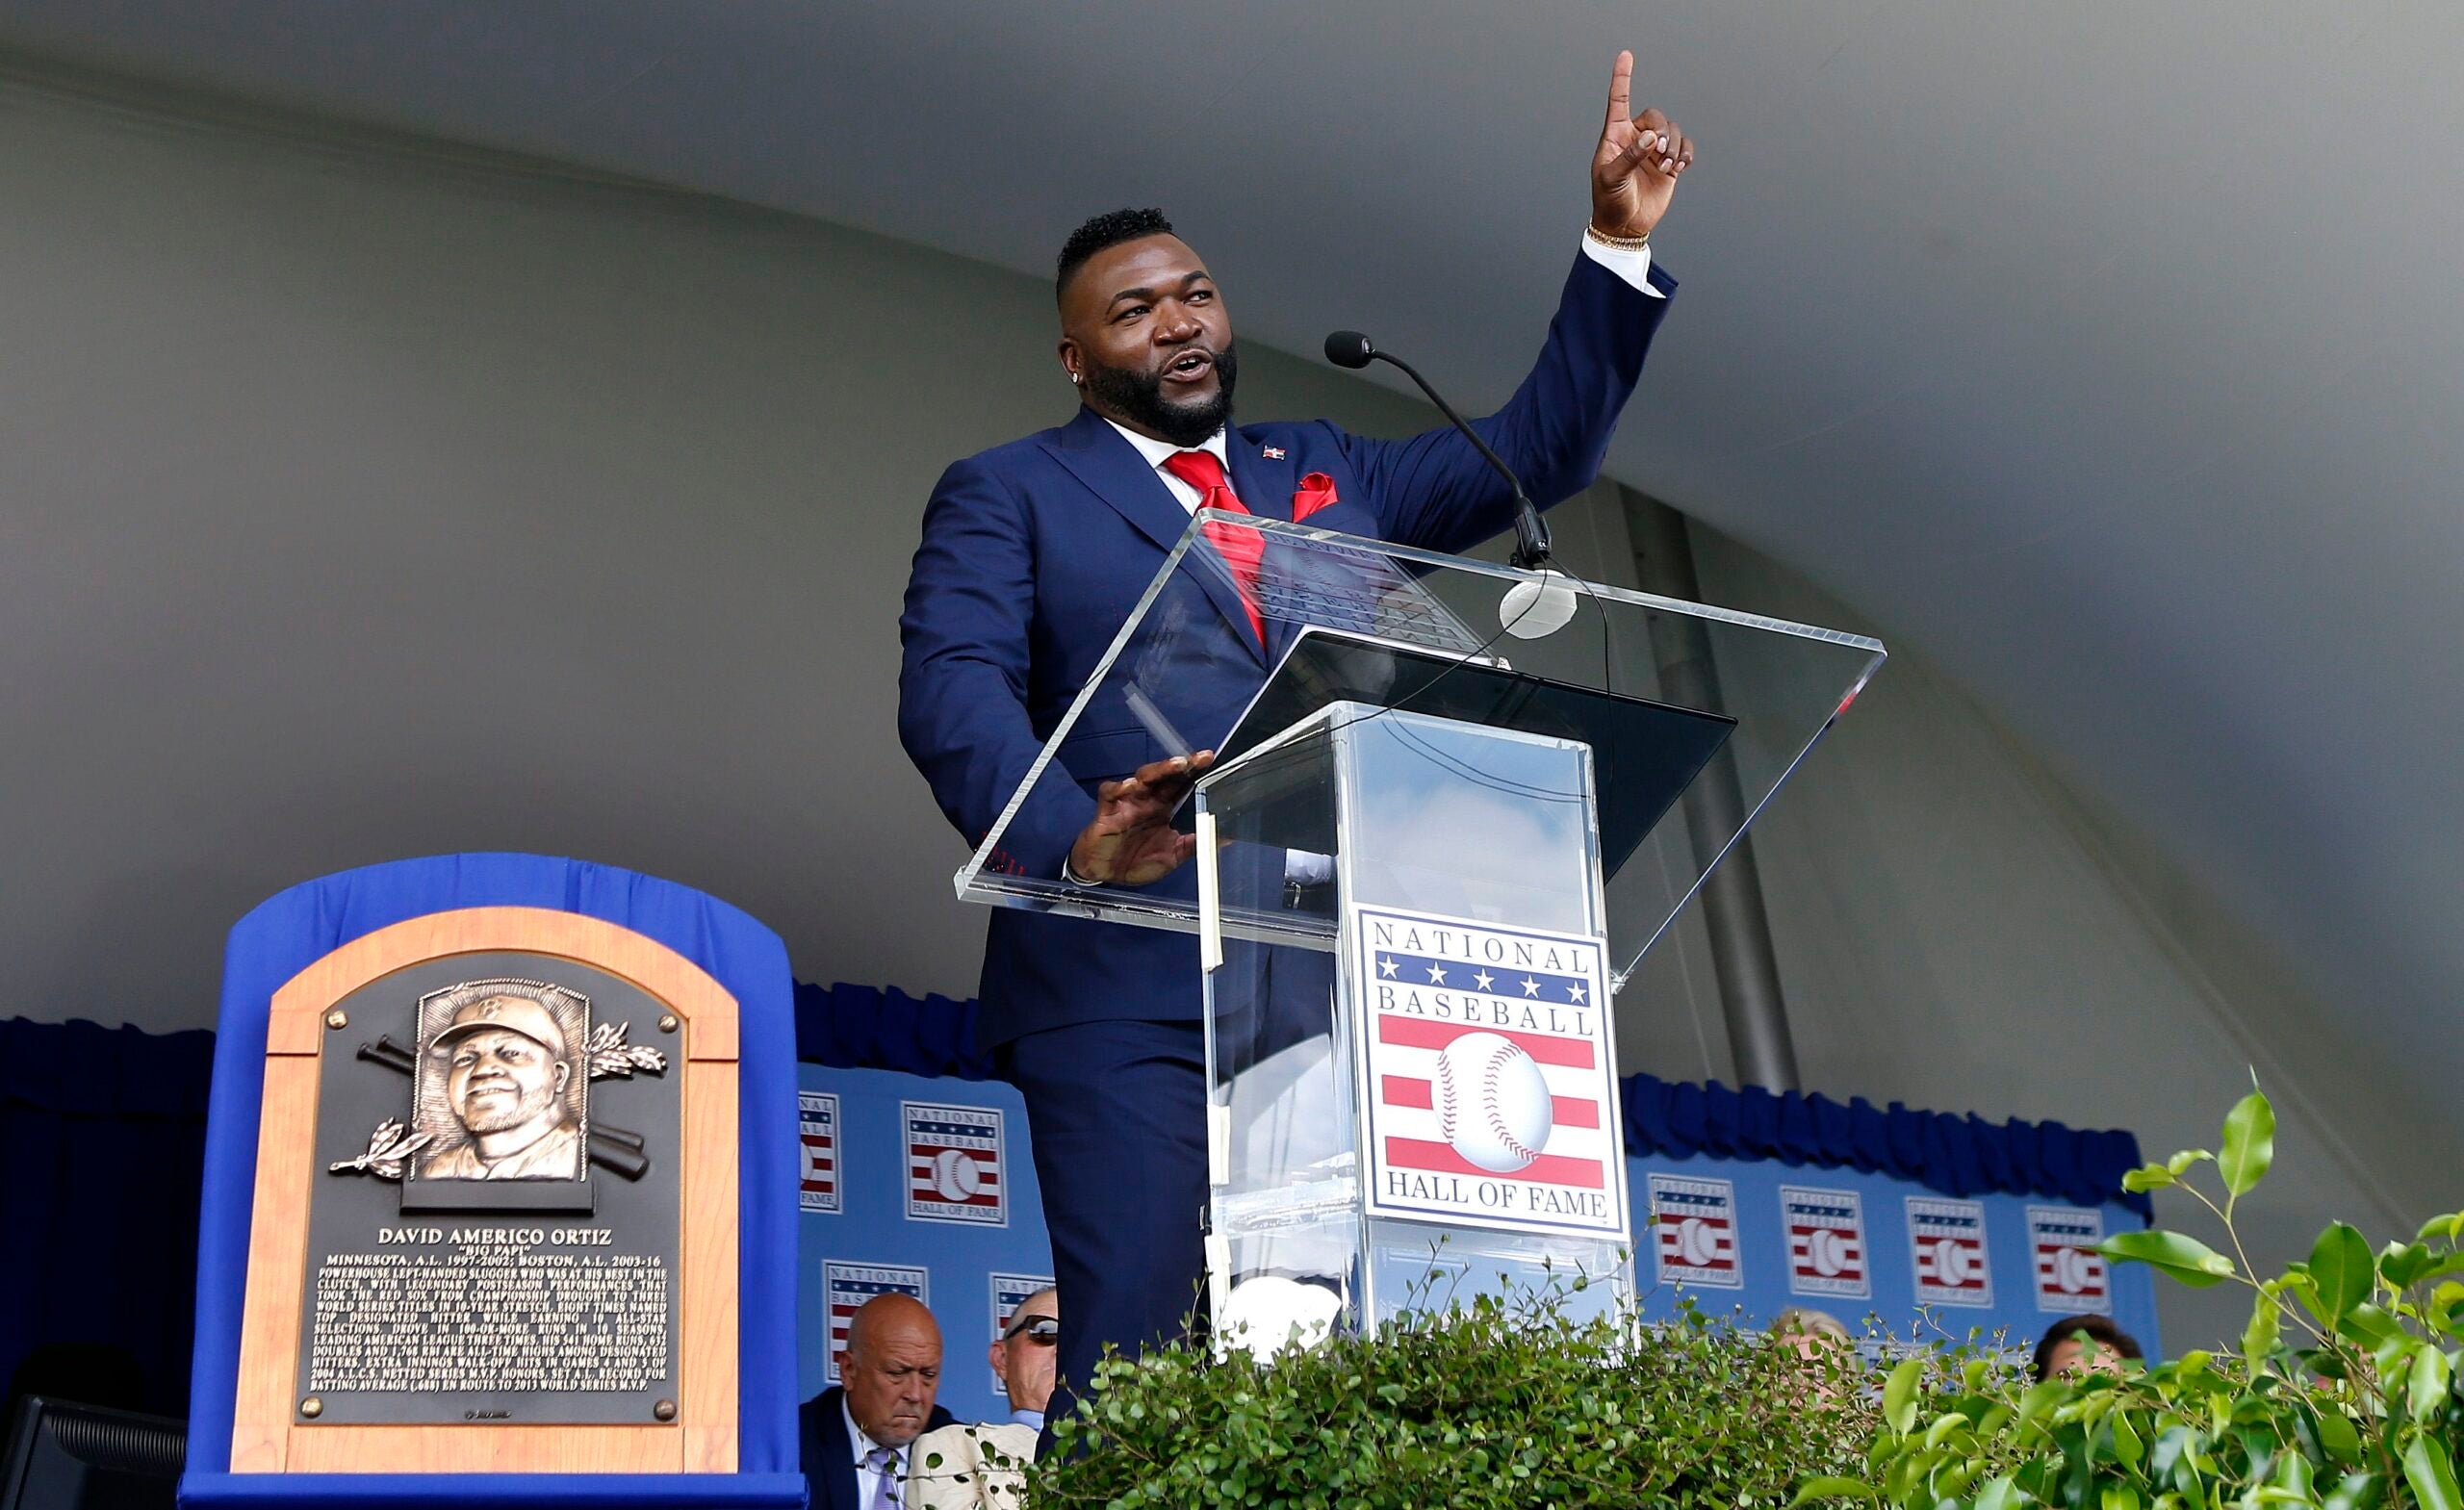 Watch: David Ortiz's speech as he is inducted into the Baseball Hall of Fame